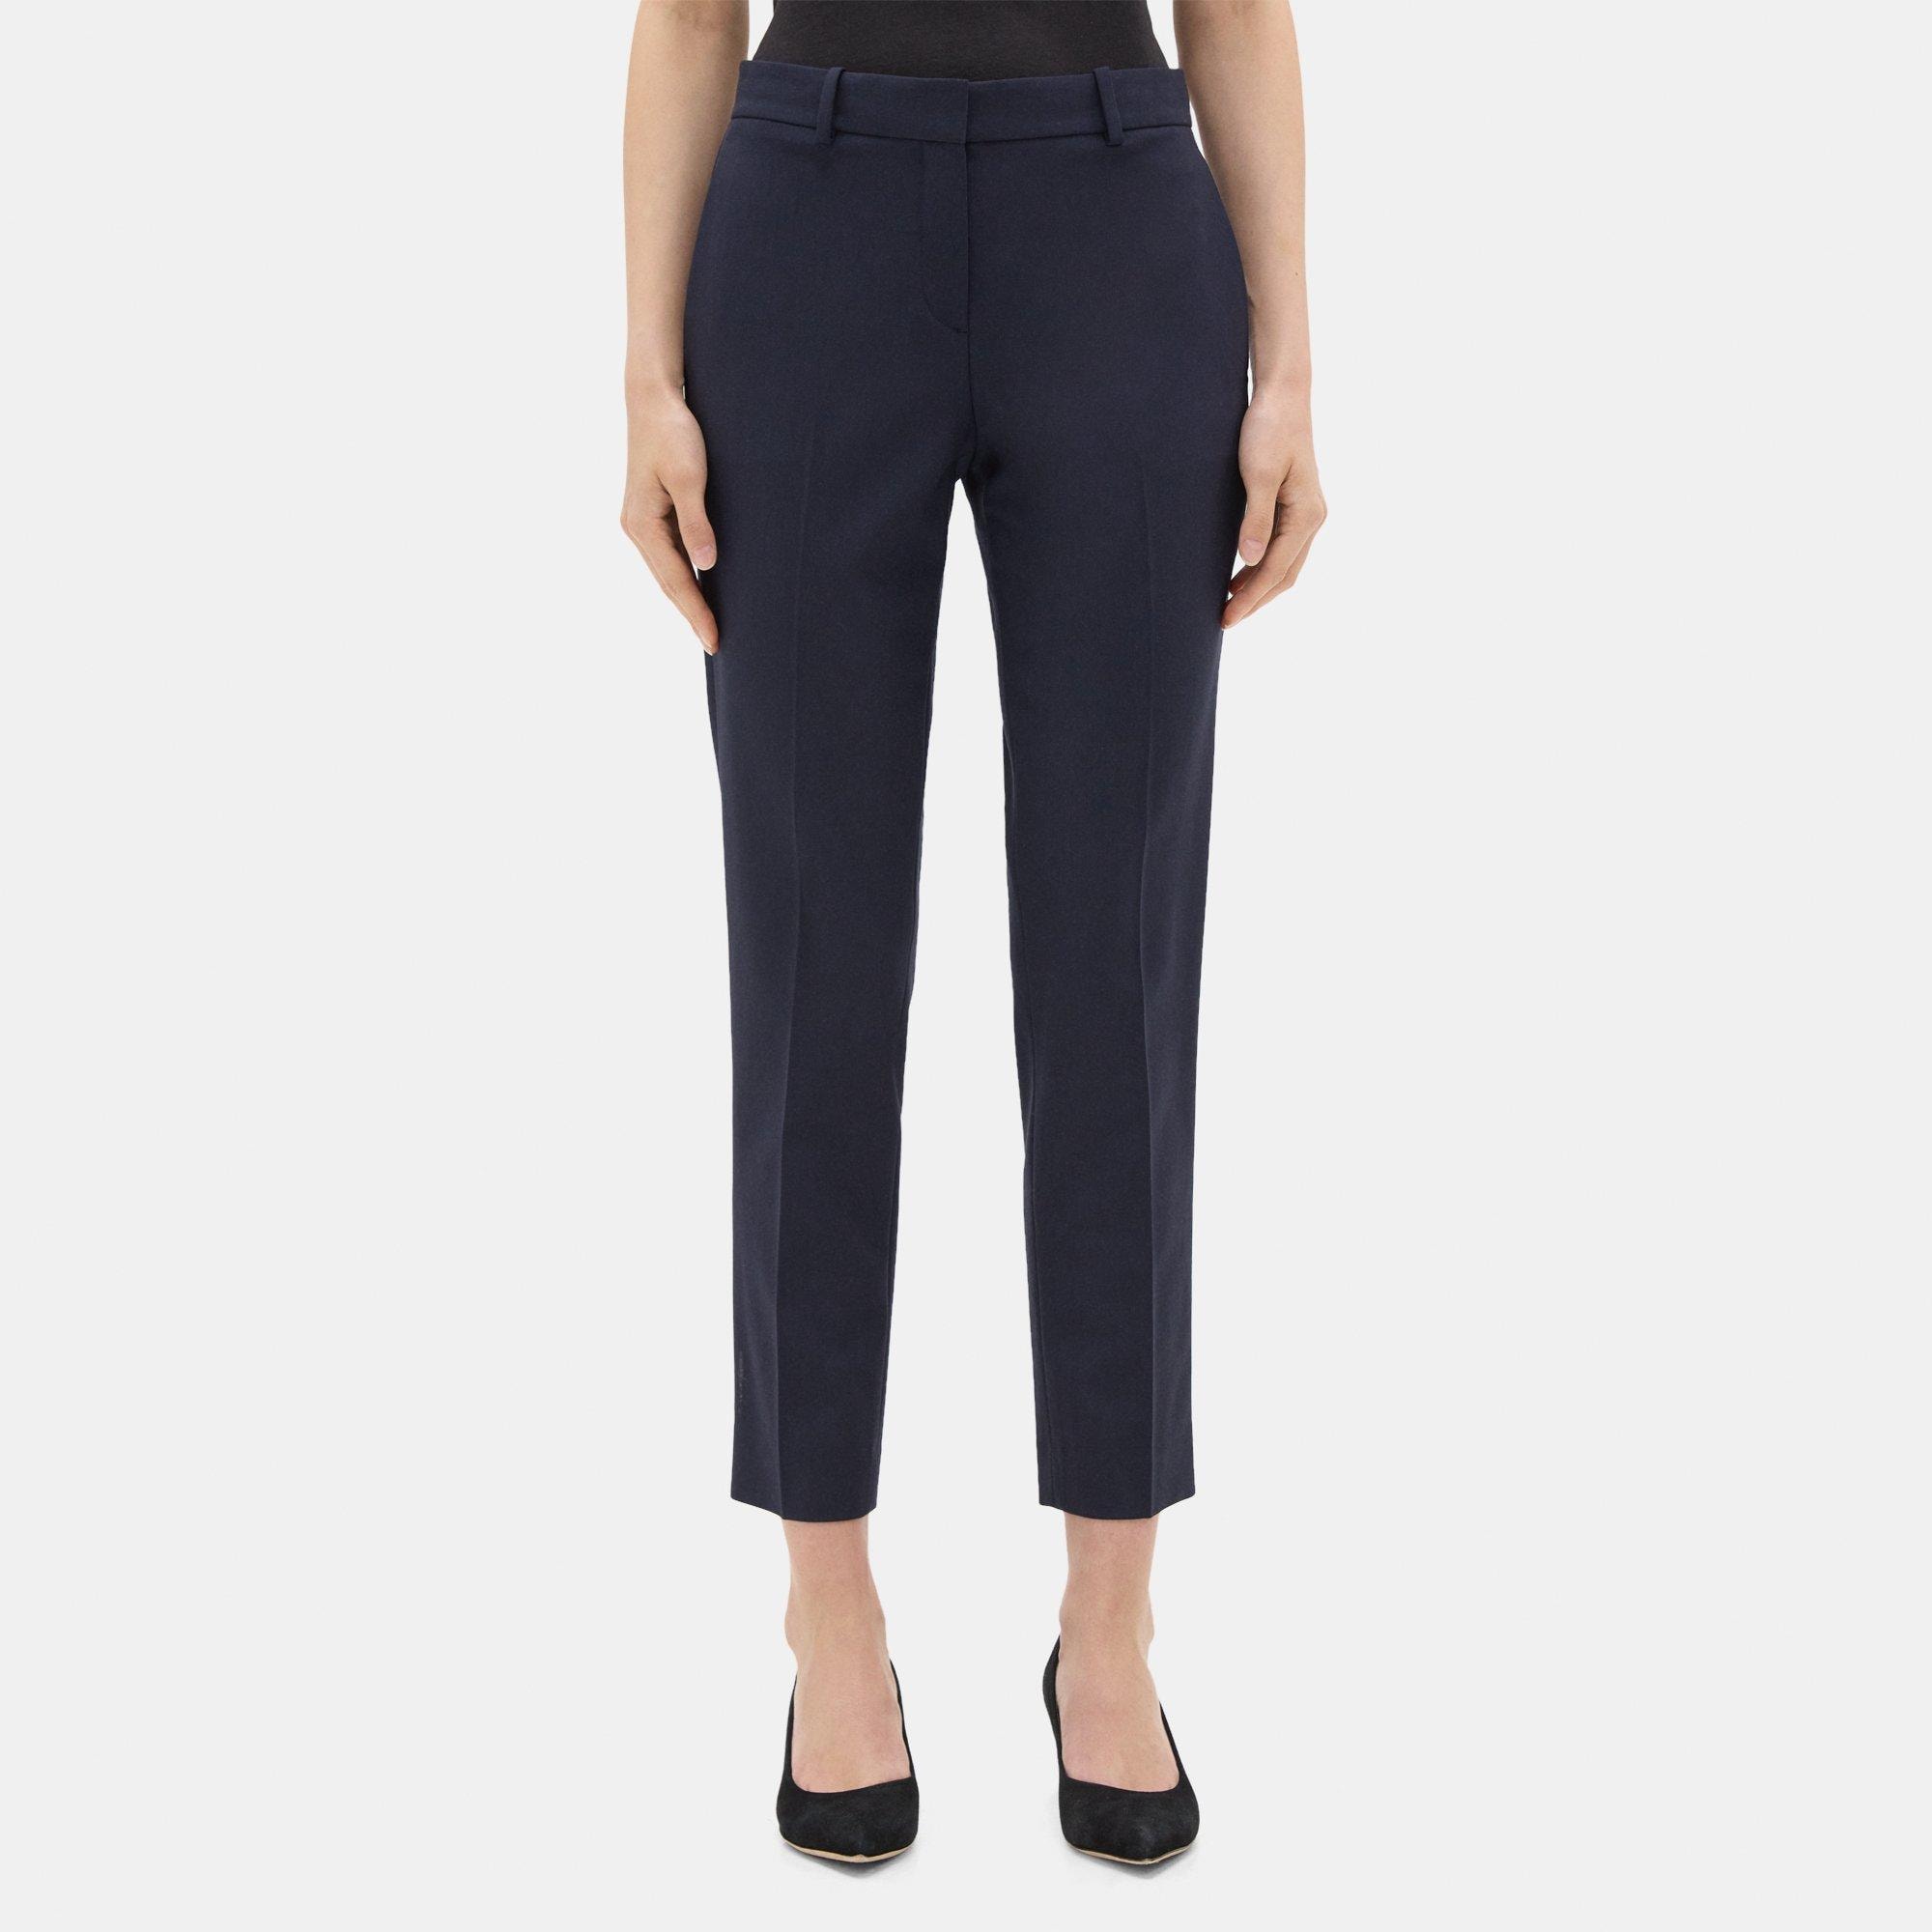 Women's Pants & Shorts | Theory Outlet